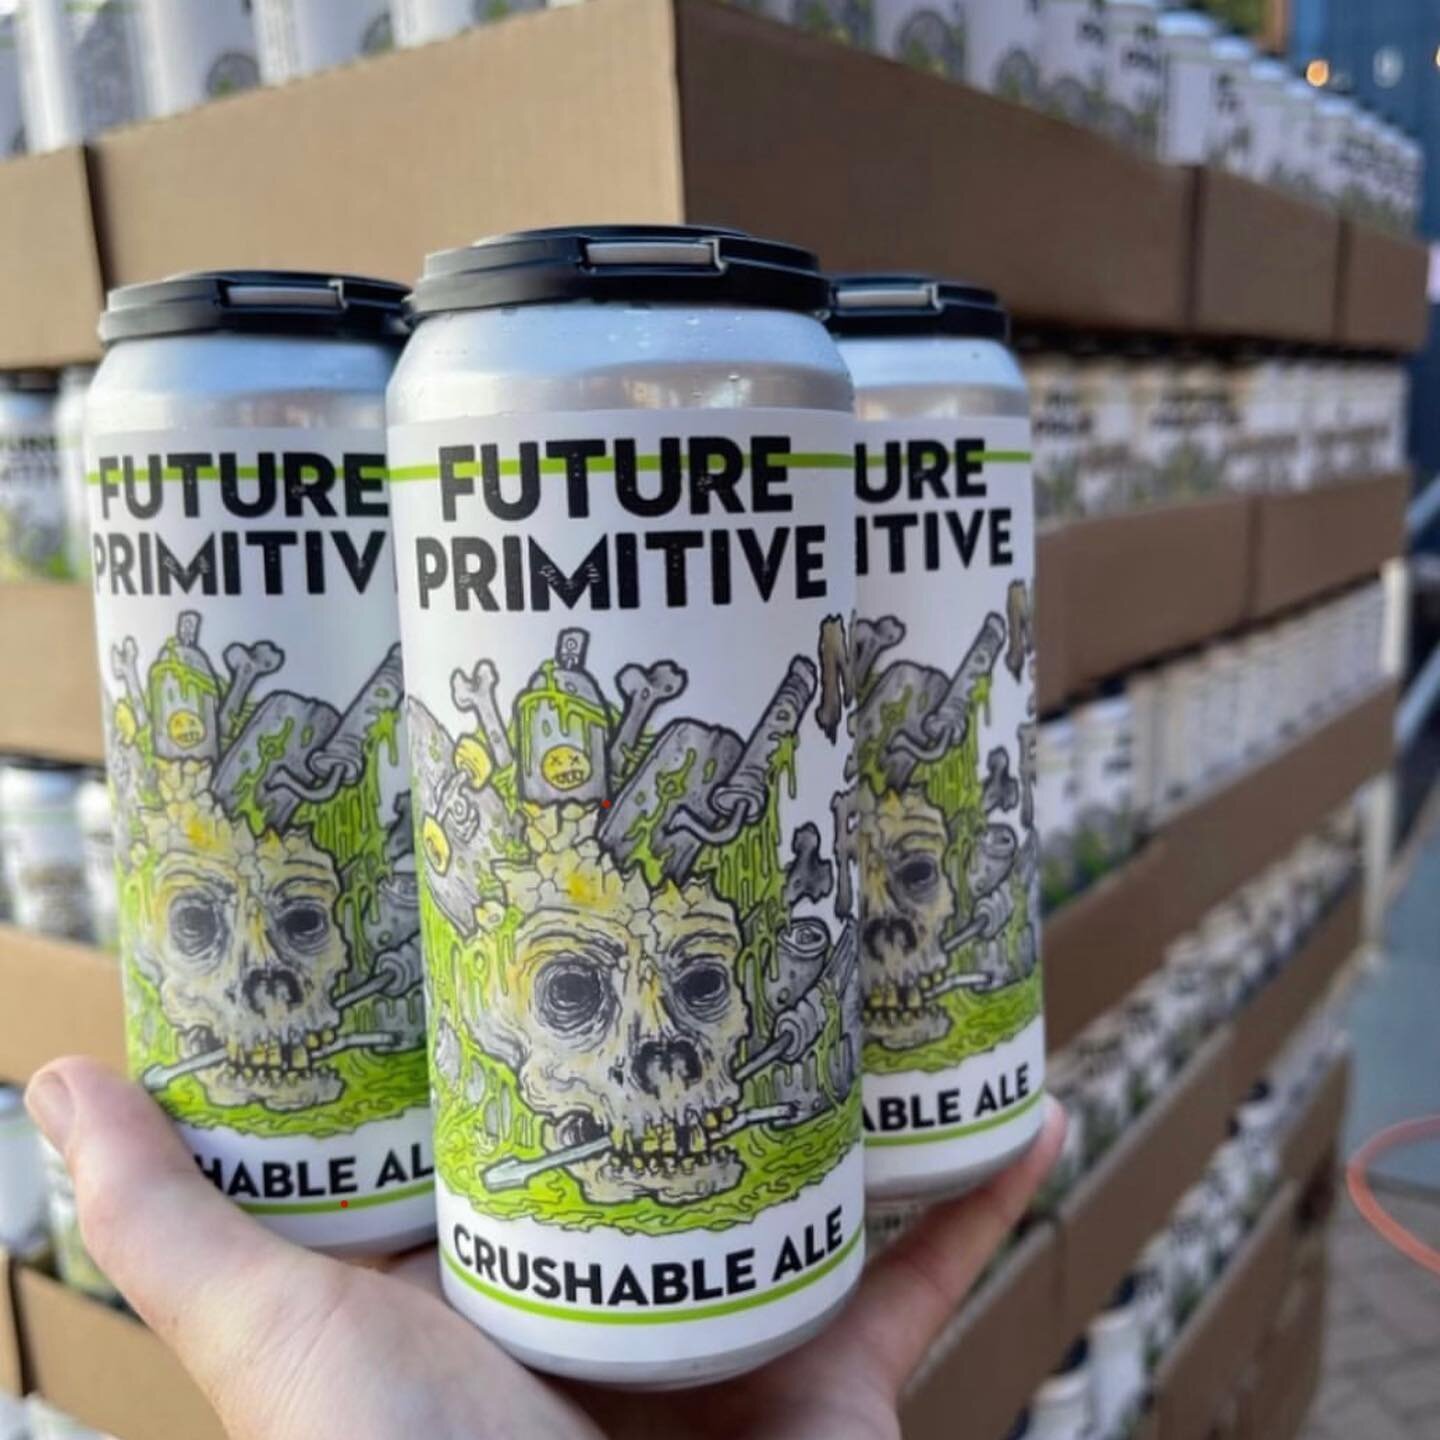 New Can Art &amp; Shirt out today at 3pm when we open! This is our Kingdome Kolsch packaged for our friends at @marginalwayskatepark with killer art by @q_quigg 

We&rsquo;re also hosting a party for it this Wednesday, 7pm at @jupiterseattle with @bl